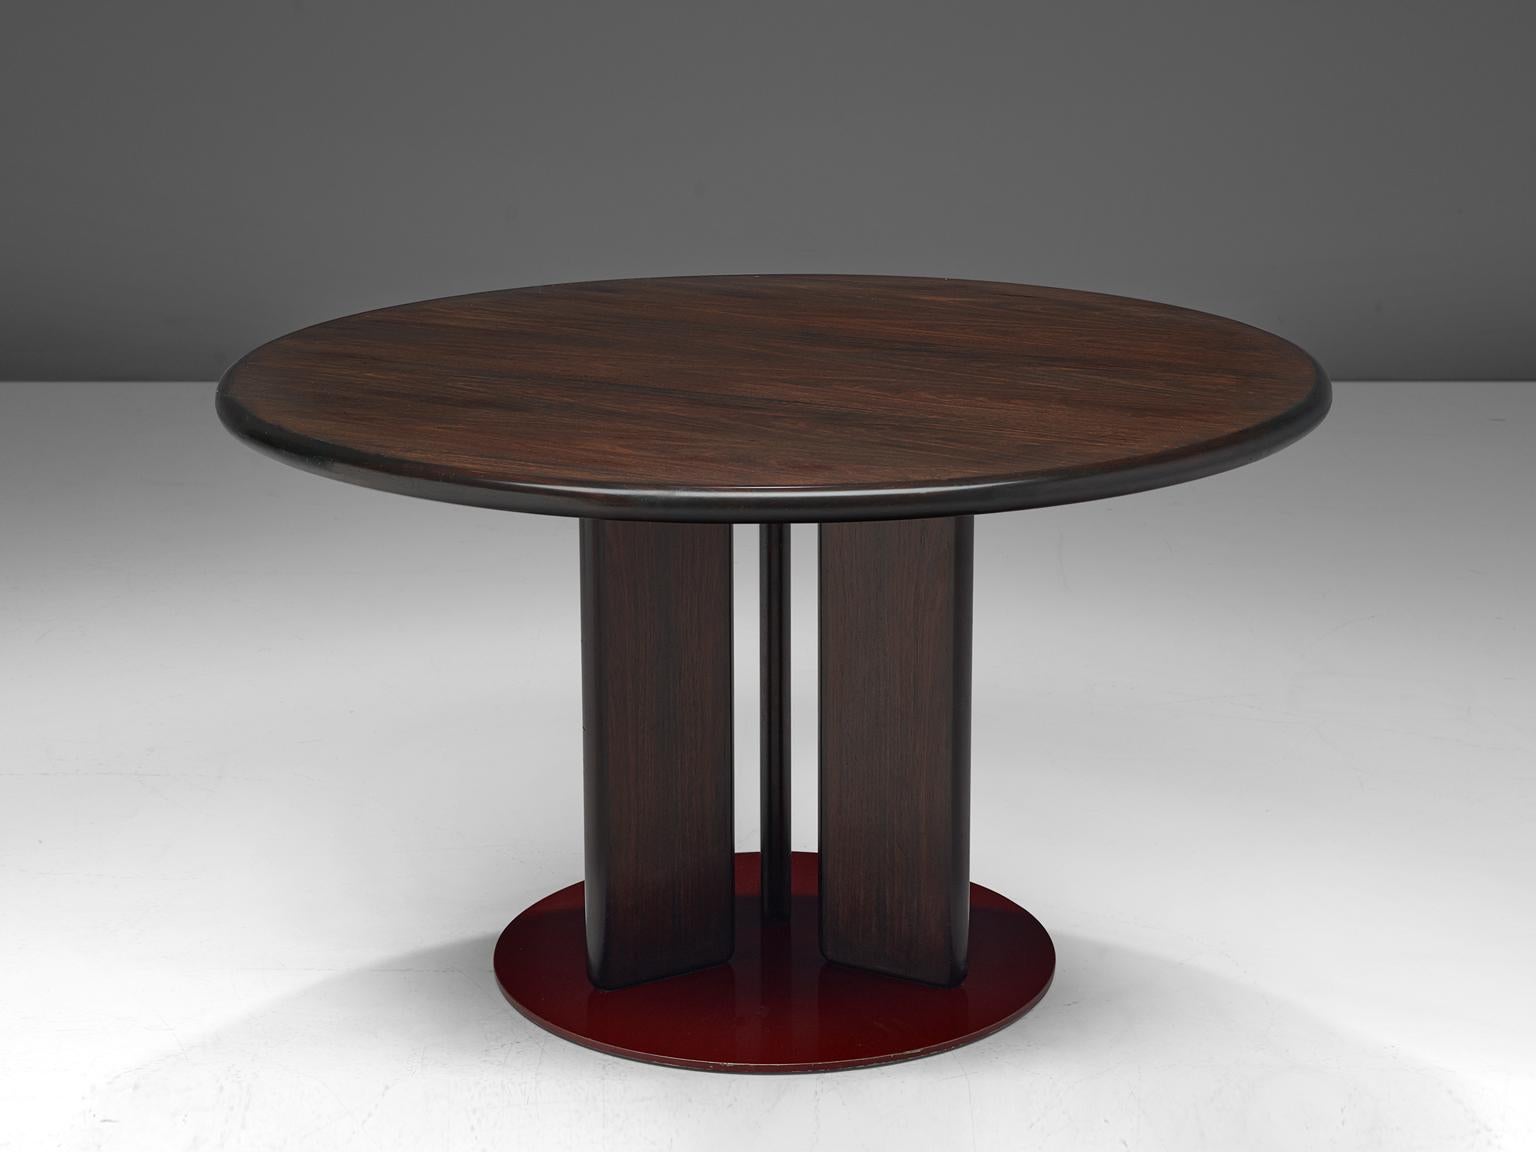 Augusto Savini, dining table, wood, Italy, 1970s.

Round dining table designed by Augusto Savini. The able is made of darkened wood and consists of three legs, attached to a red lacquered foot. The table can function as a dining table or a center